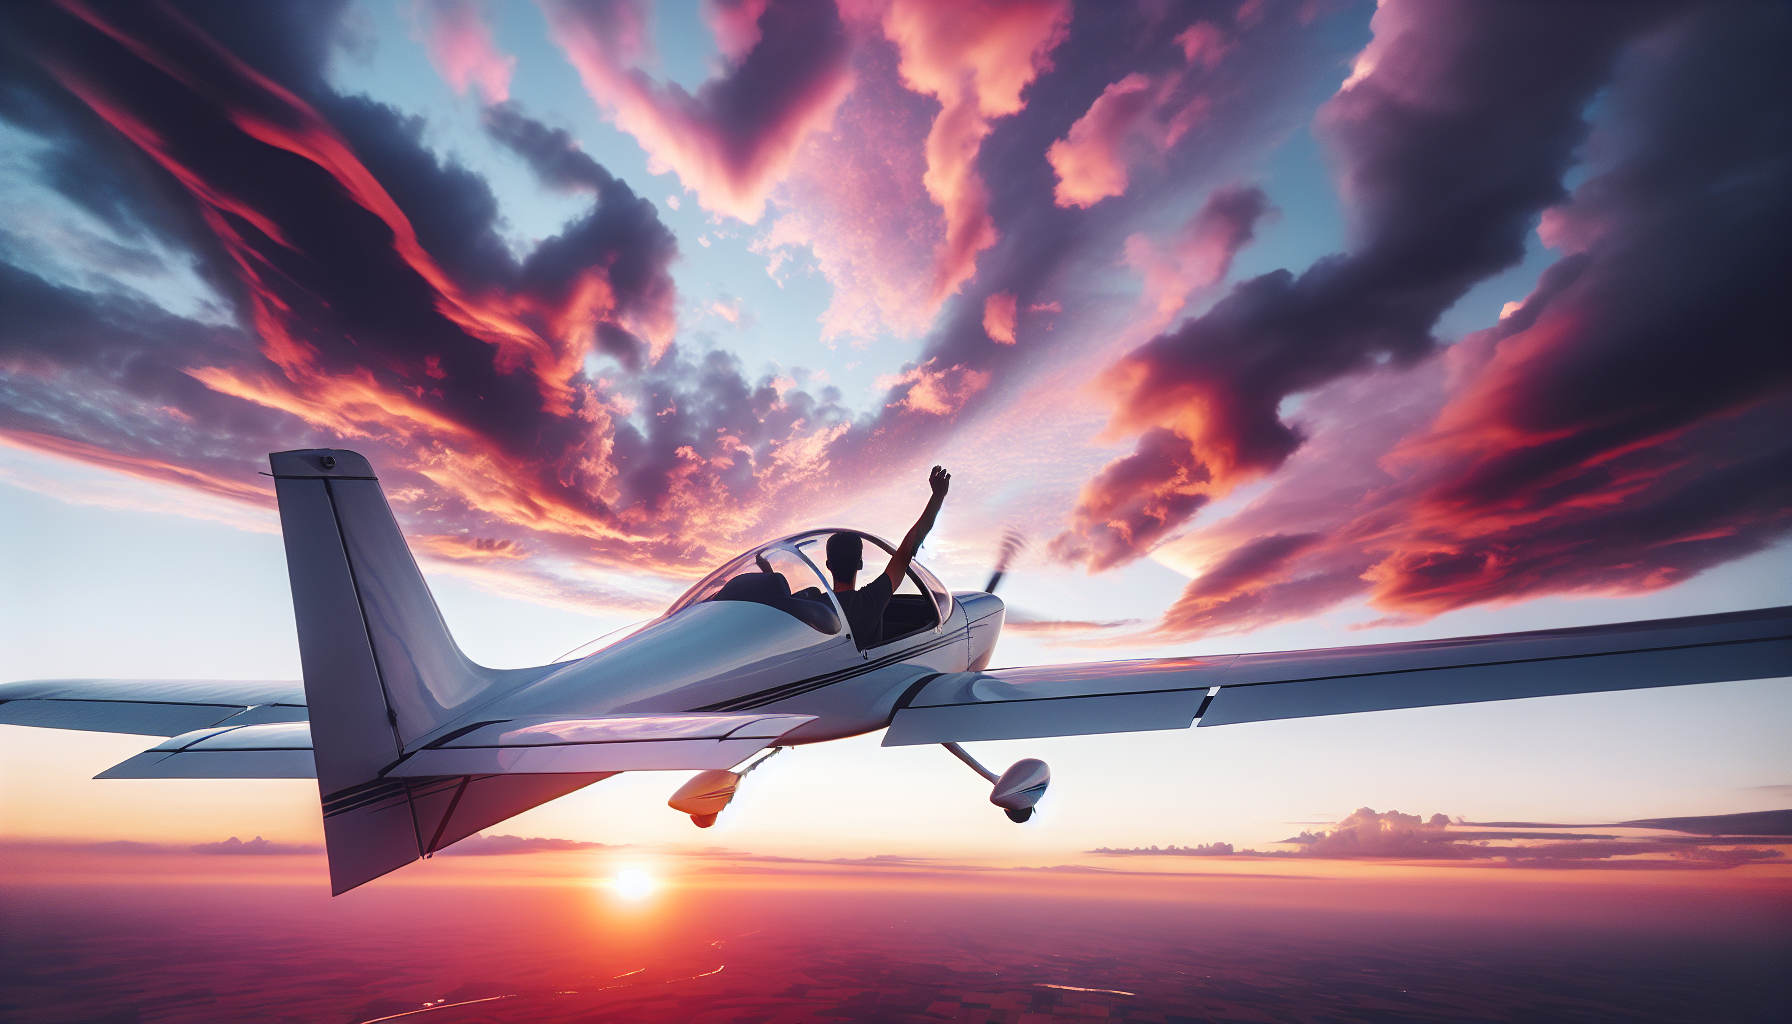 A light sport aircraft flying in the sky